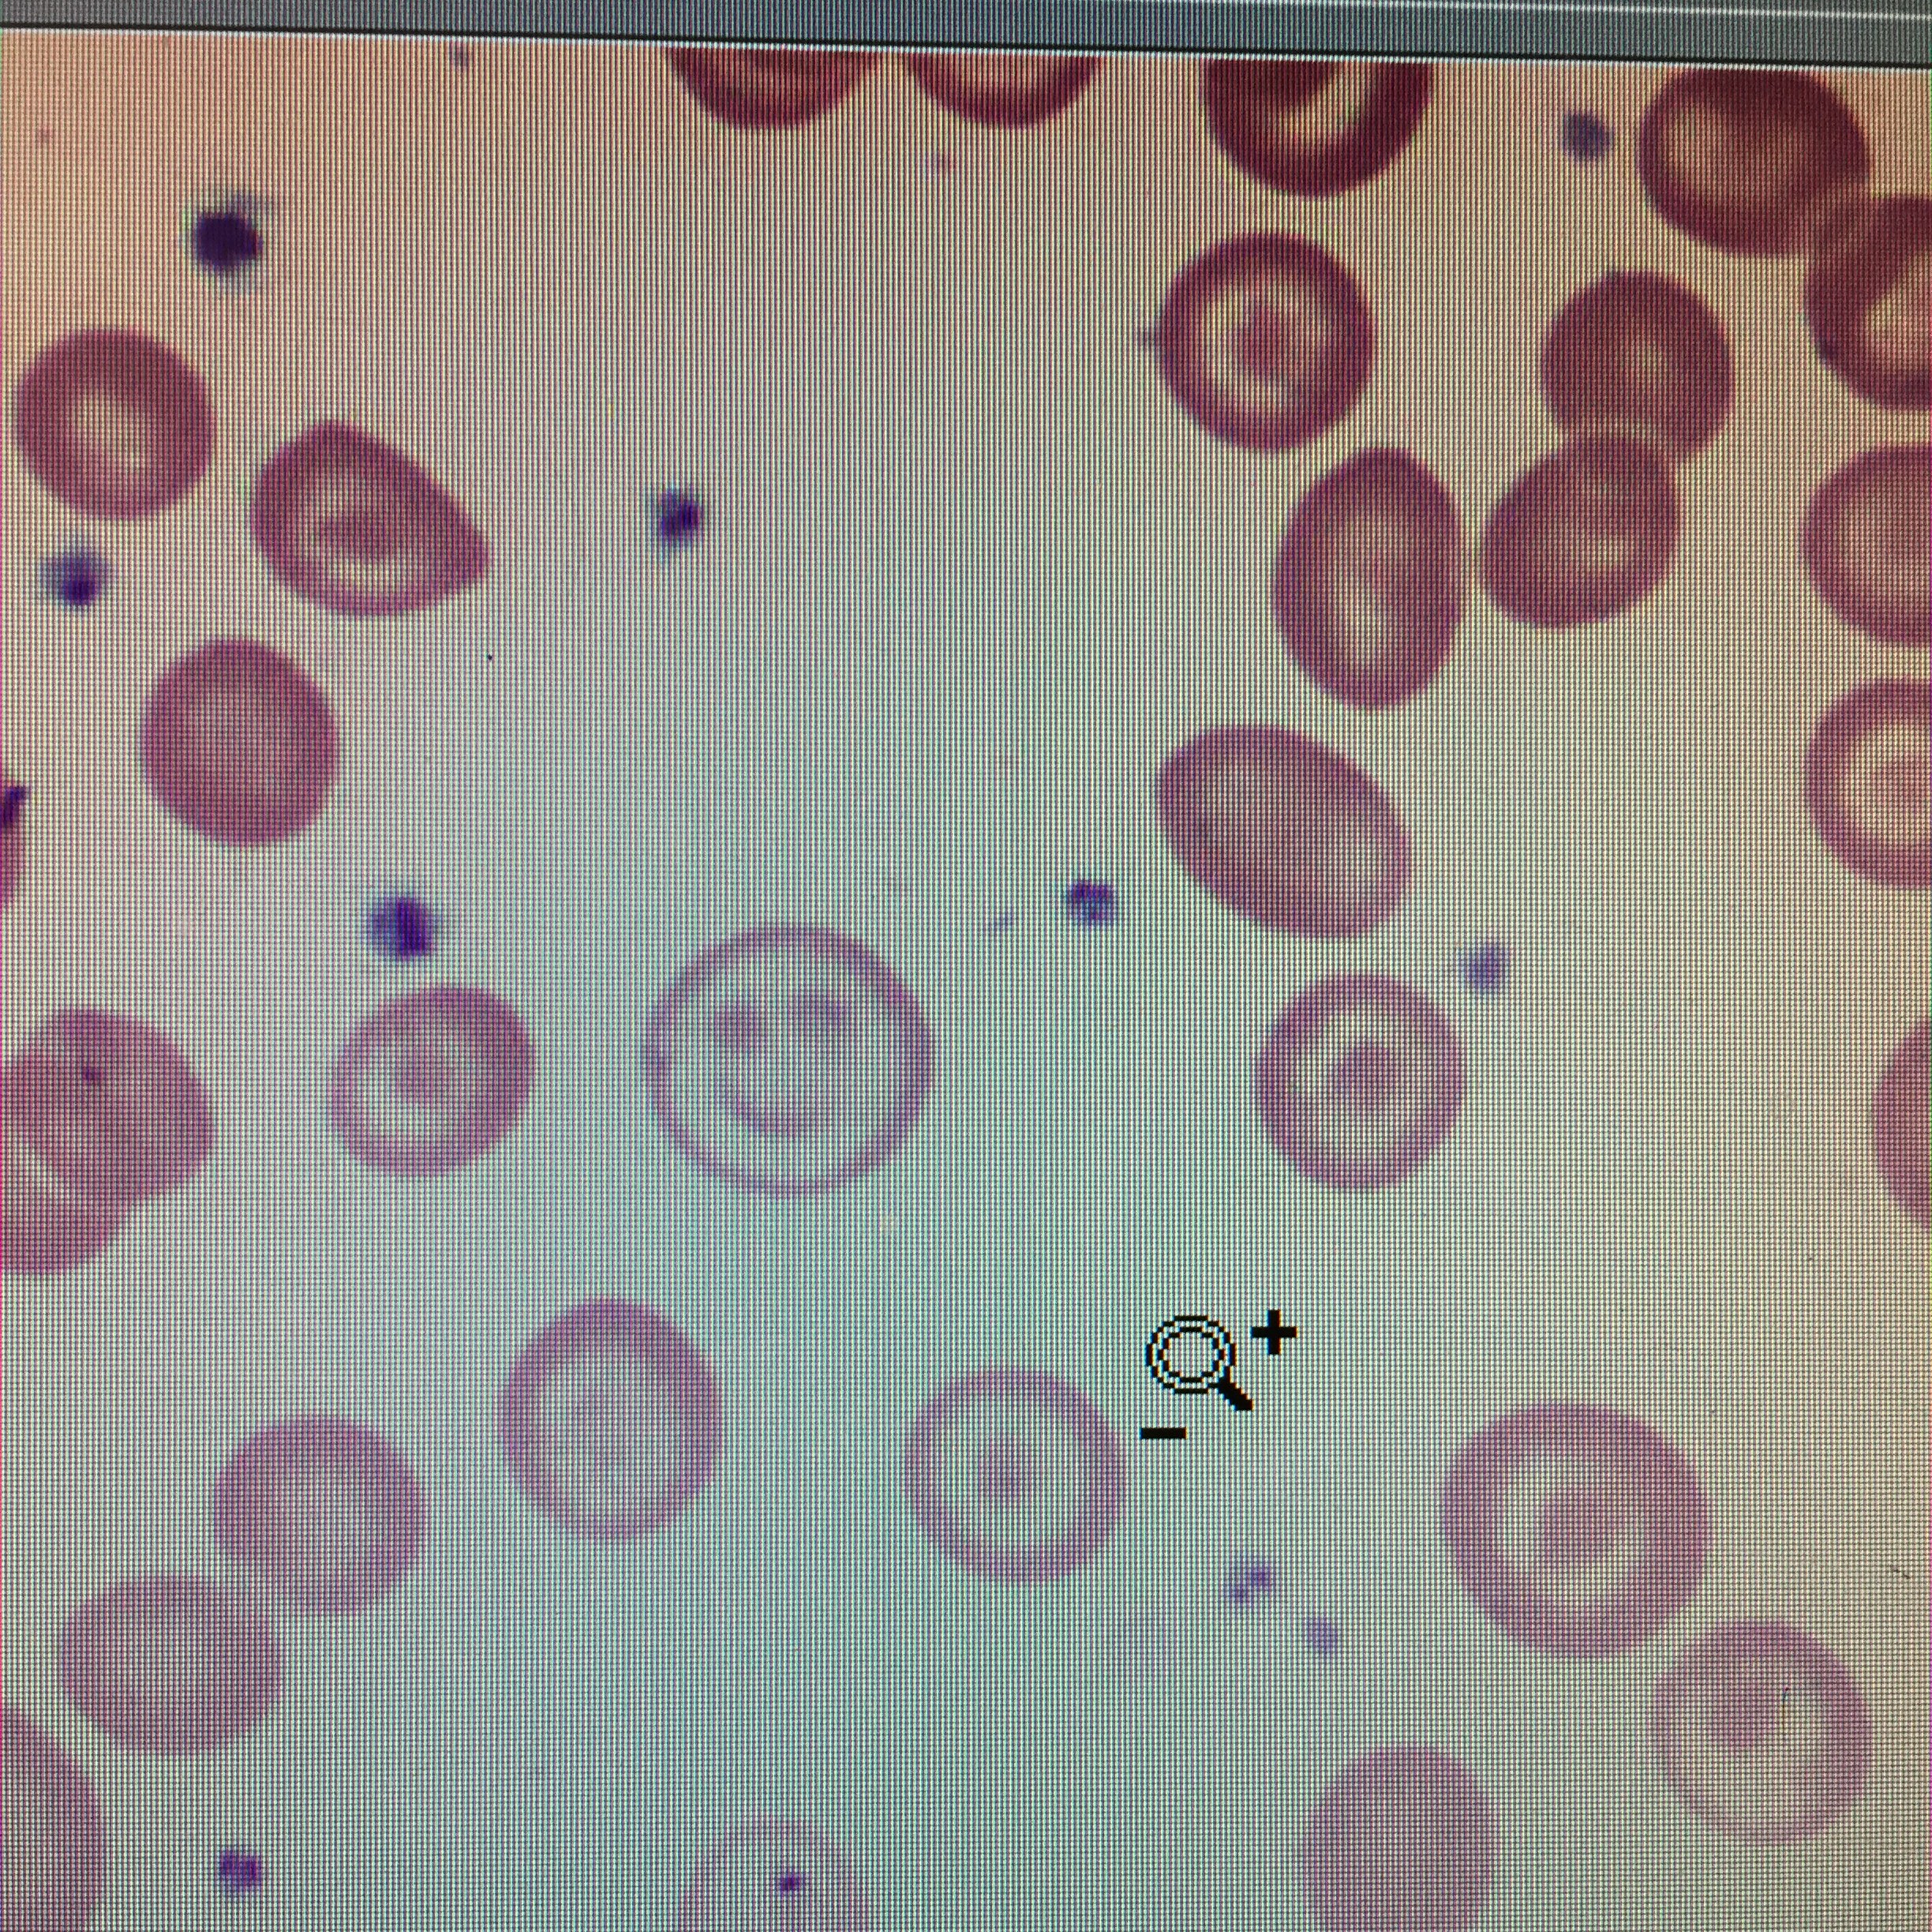 Interesting shape cells - Smiley face